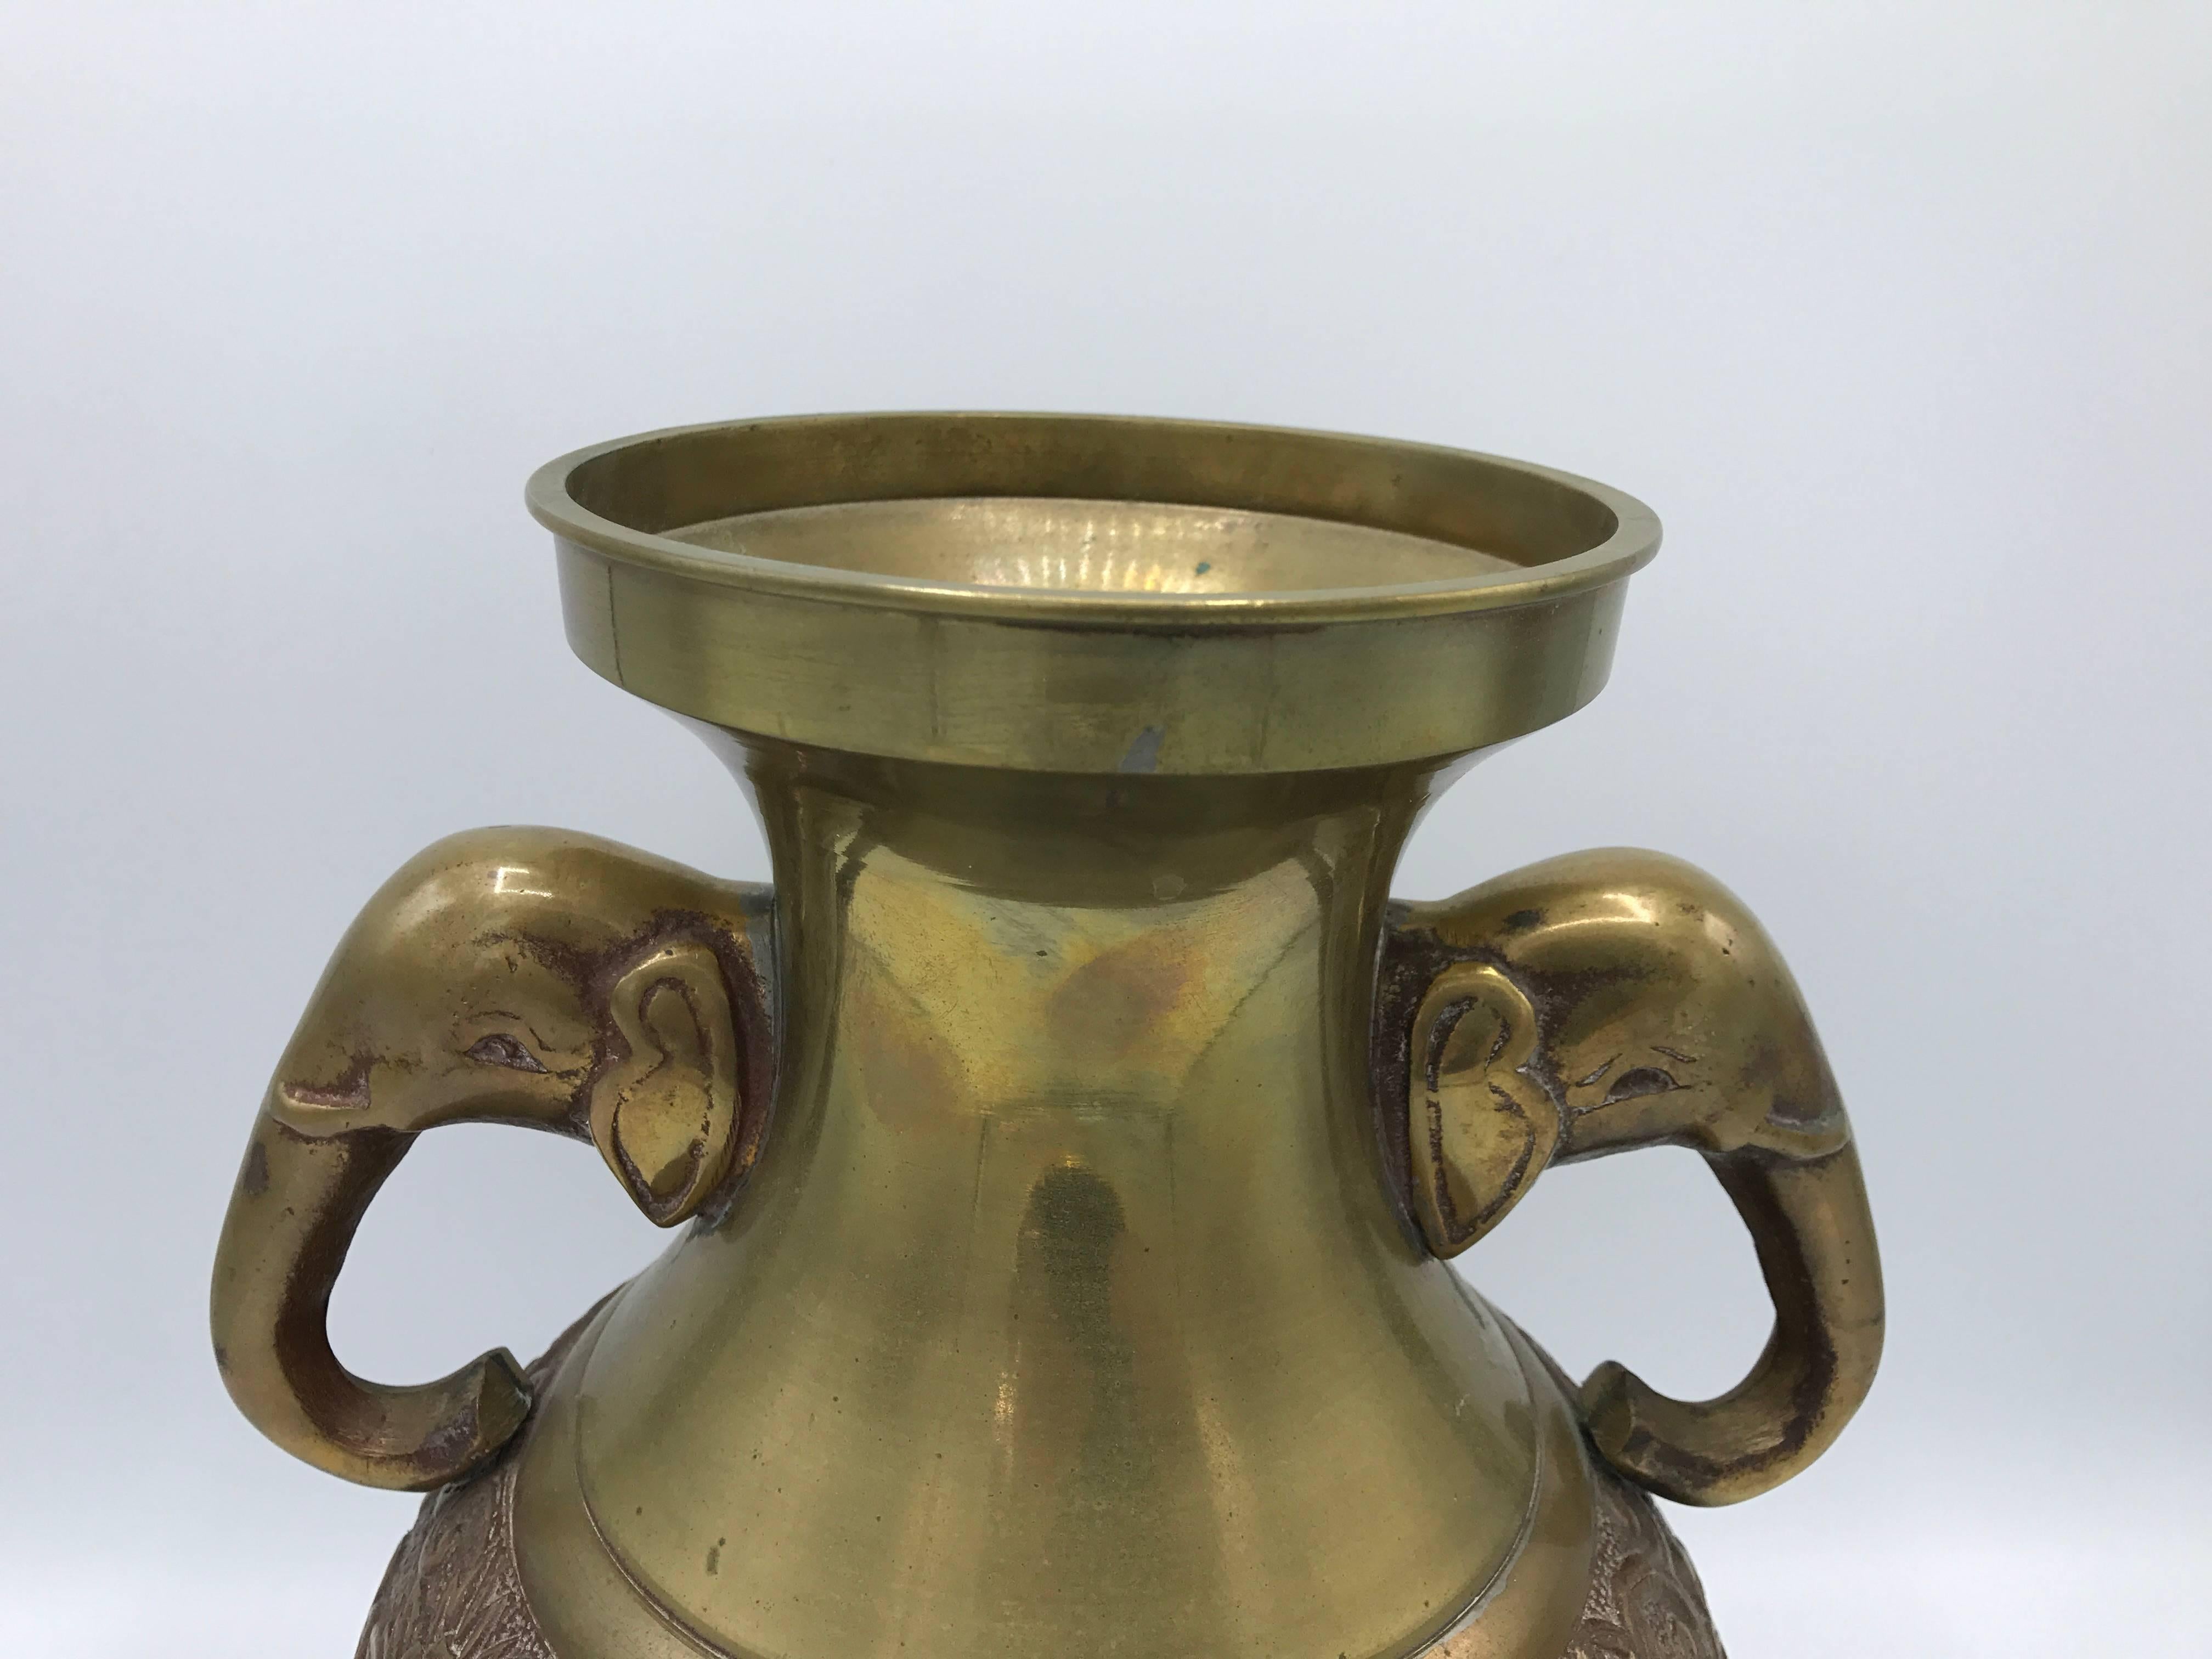 Offered is a gorgeous, 1970s brass urn with elephant handles. Heavy.